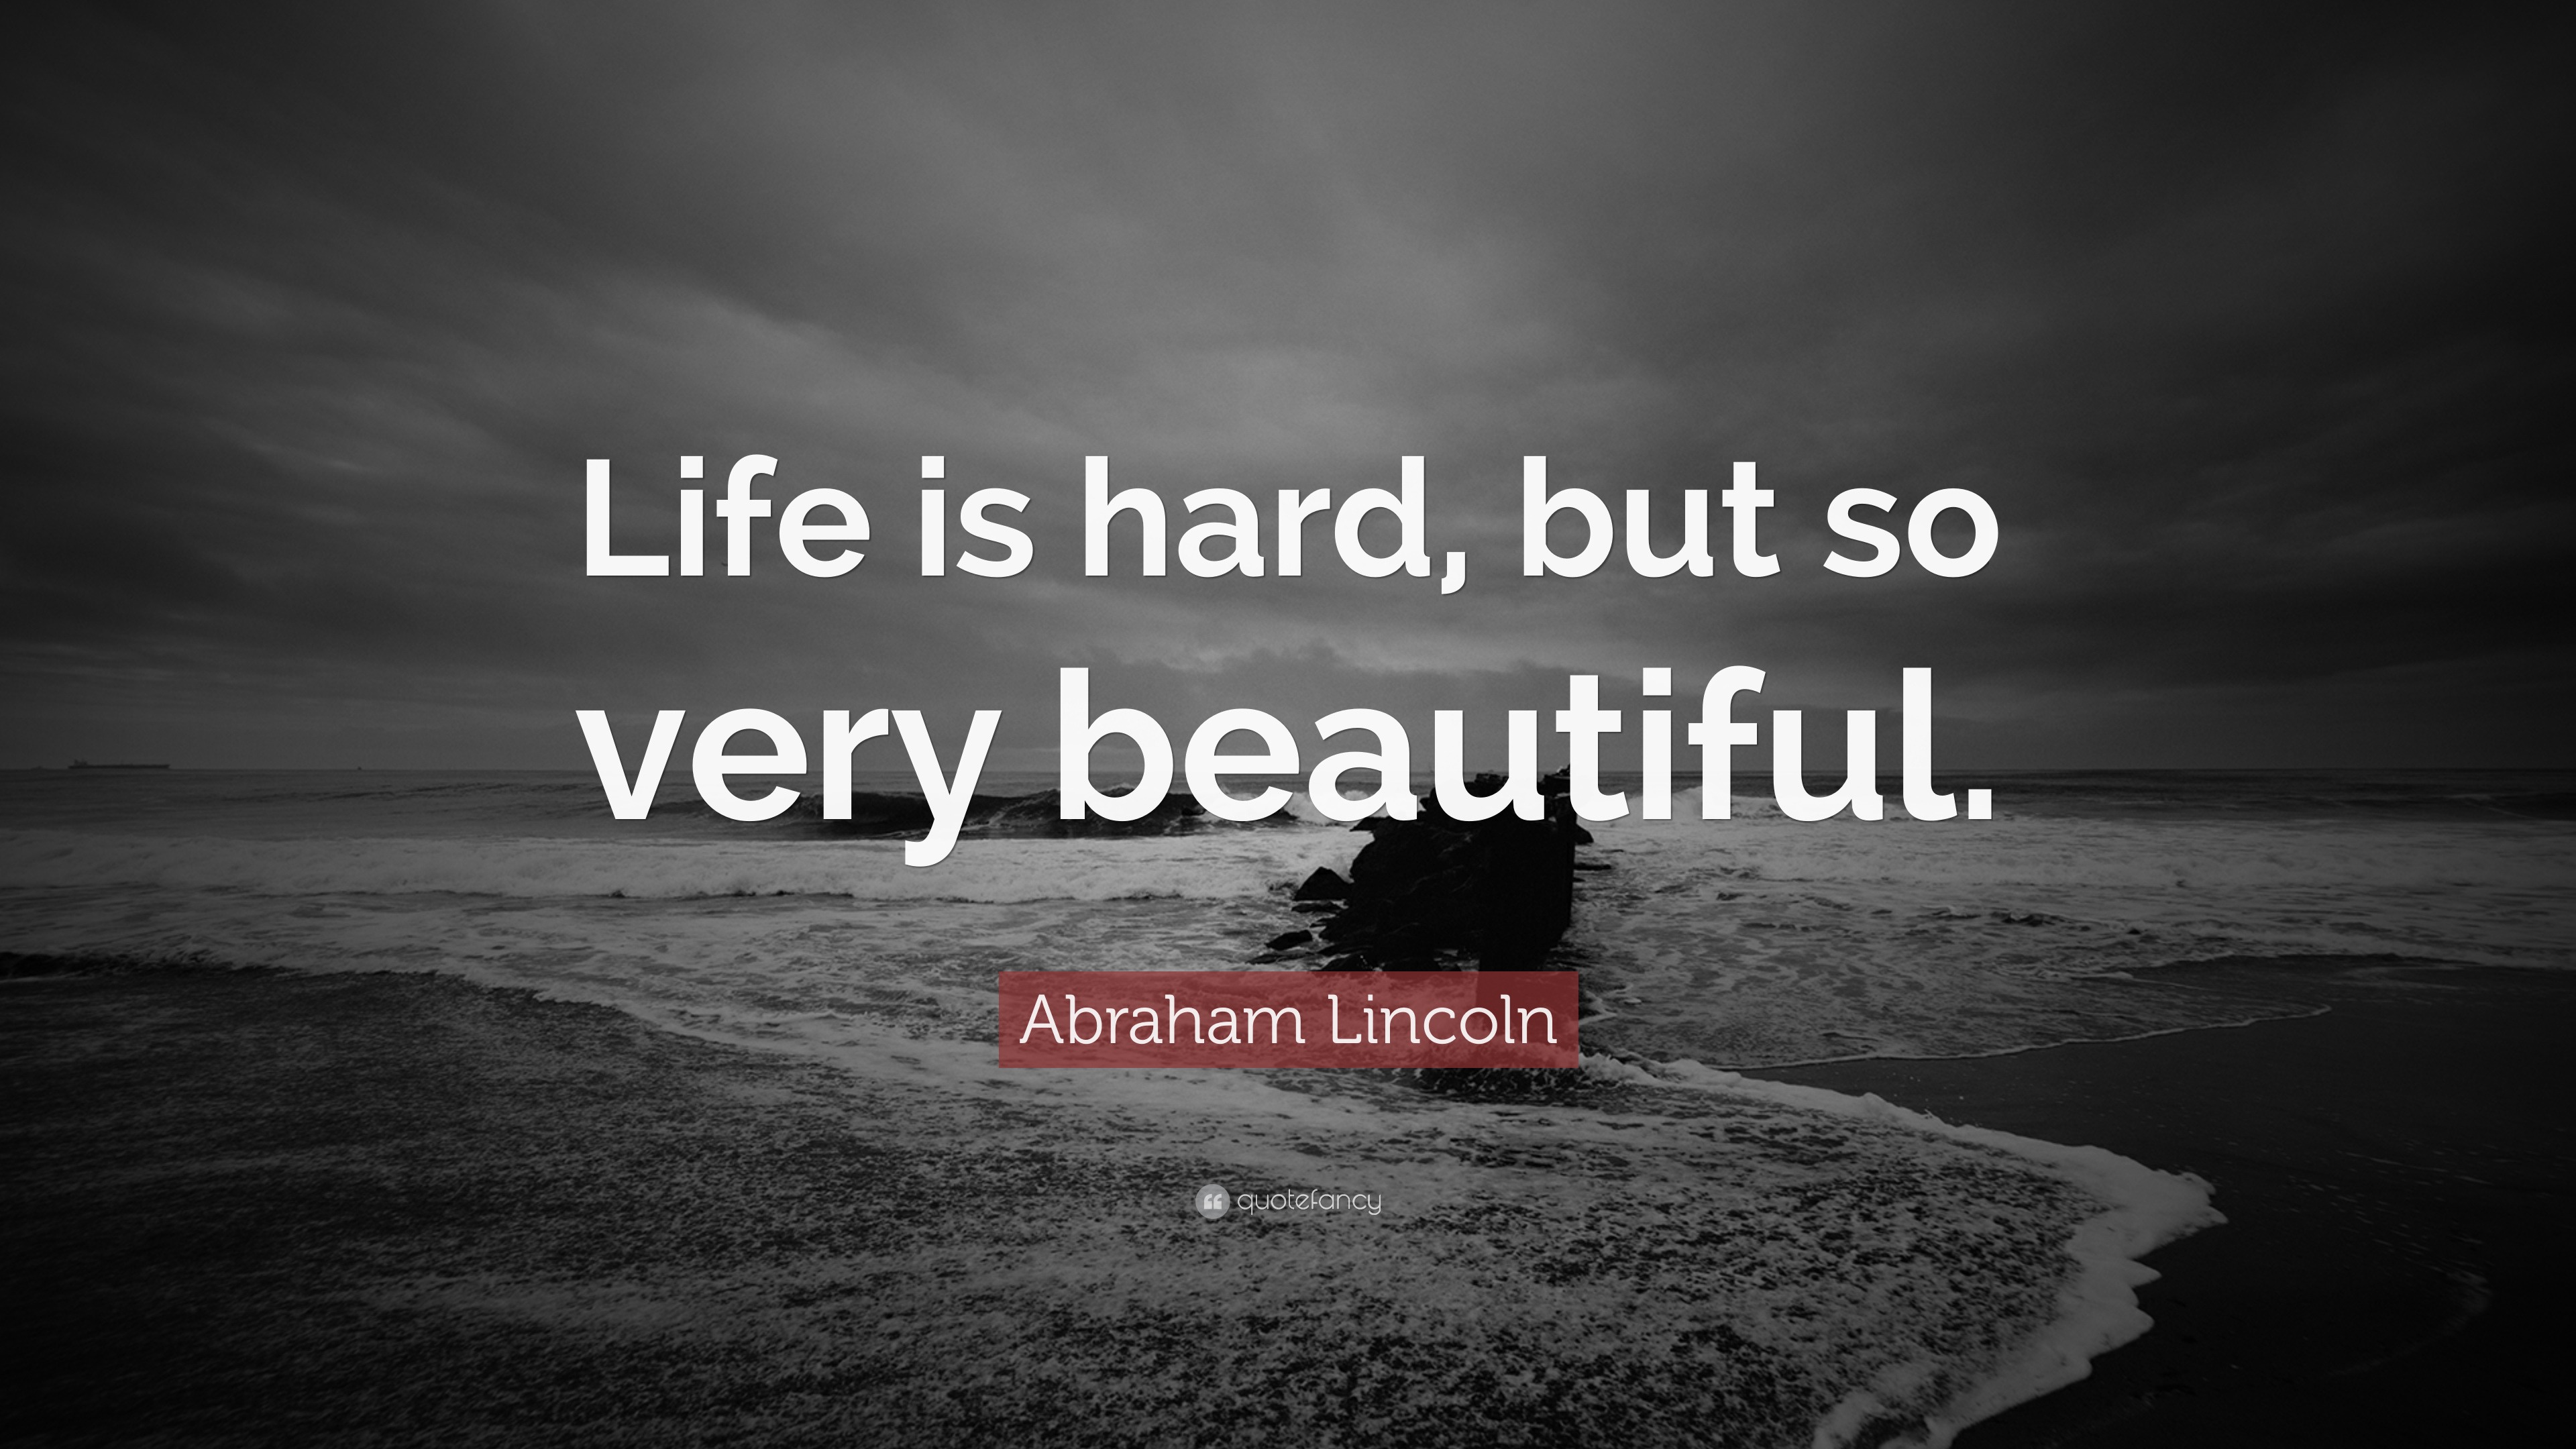 Abraham Lincoln Quote “Life is hard but so very beautiful ”